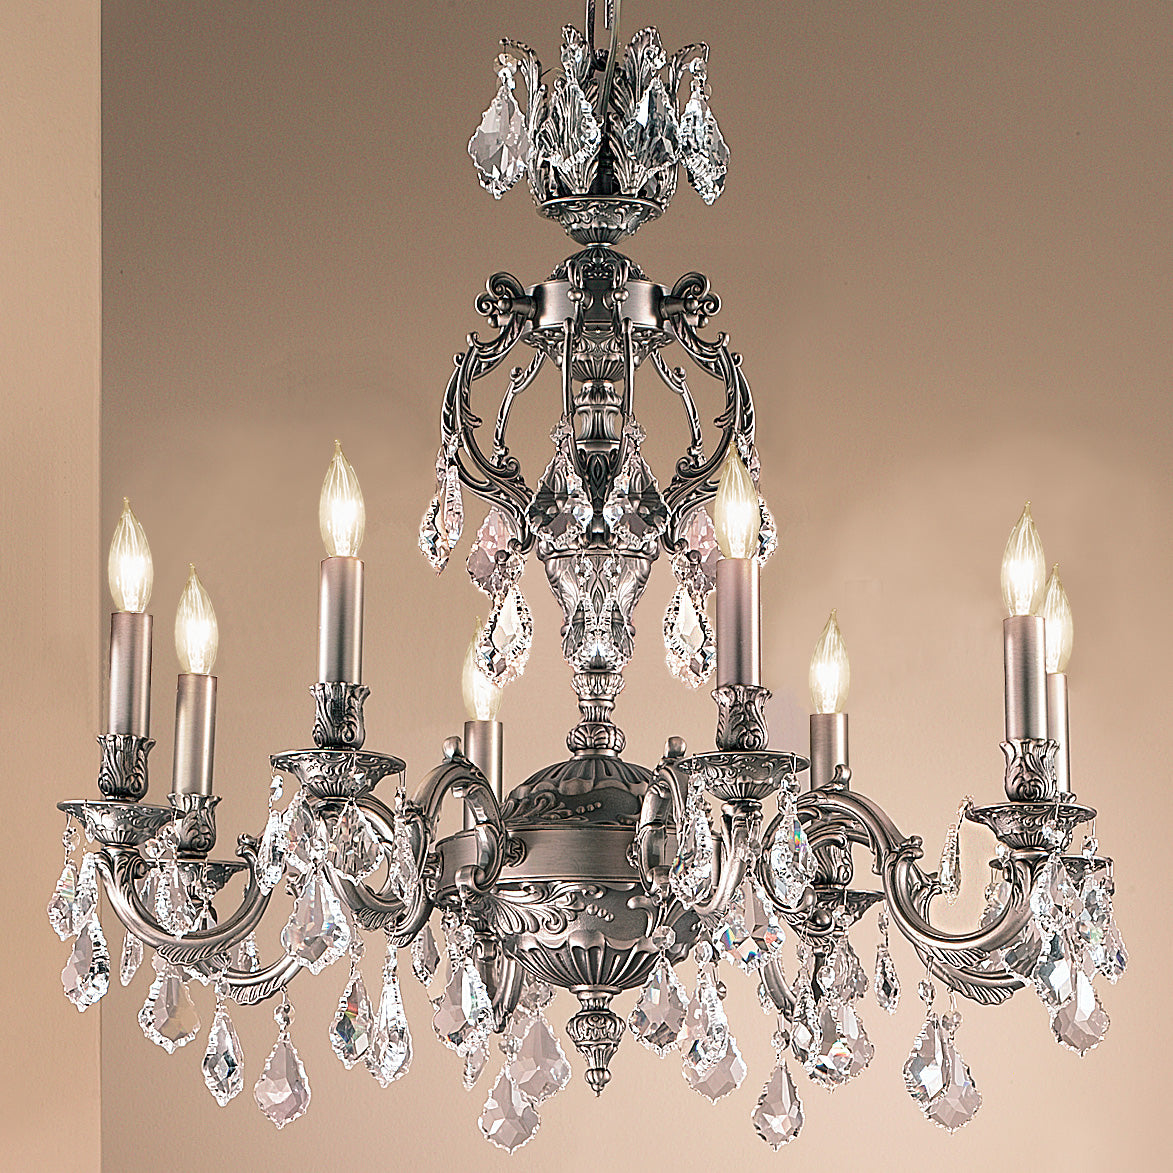 Classic Lighting 57378 AGB S Chateau Crystal Chandelier in Aged Bronze (Imported from Spain)